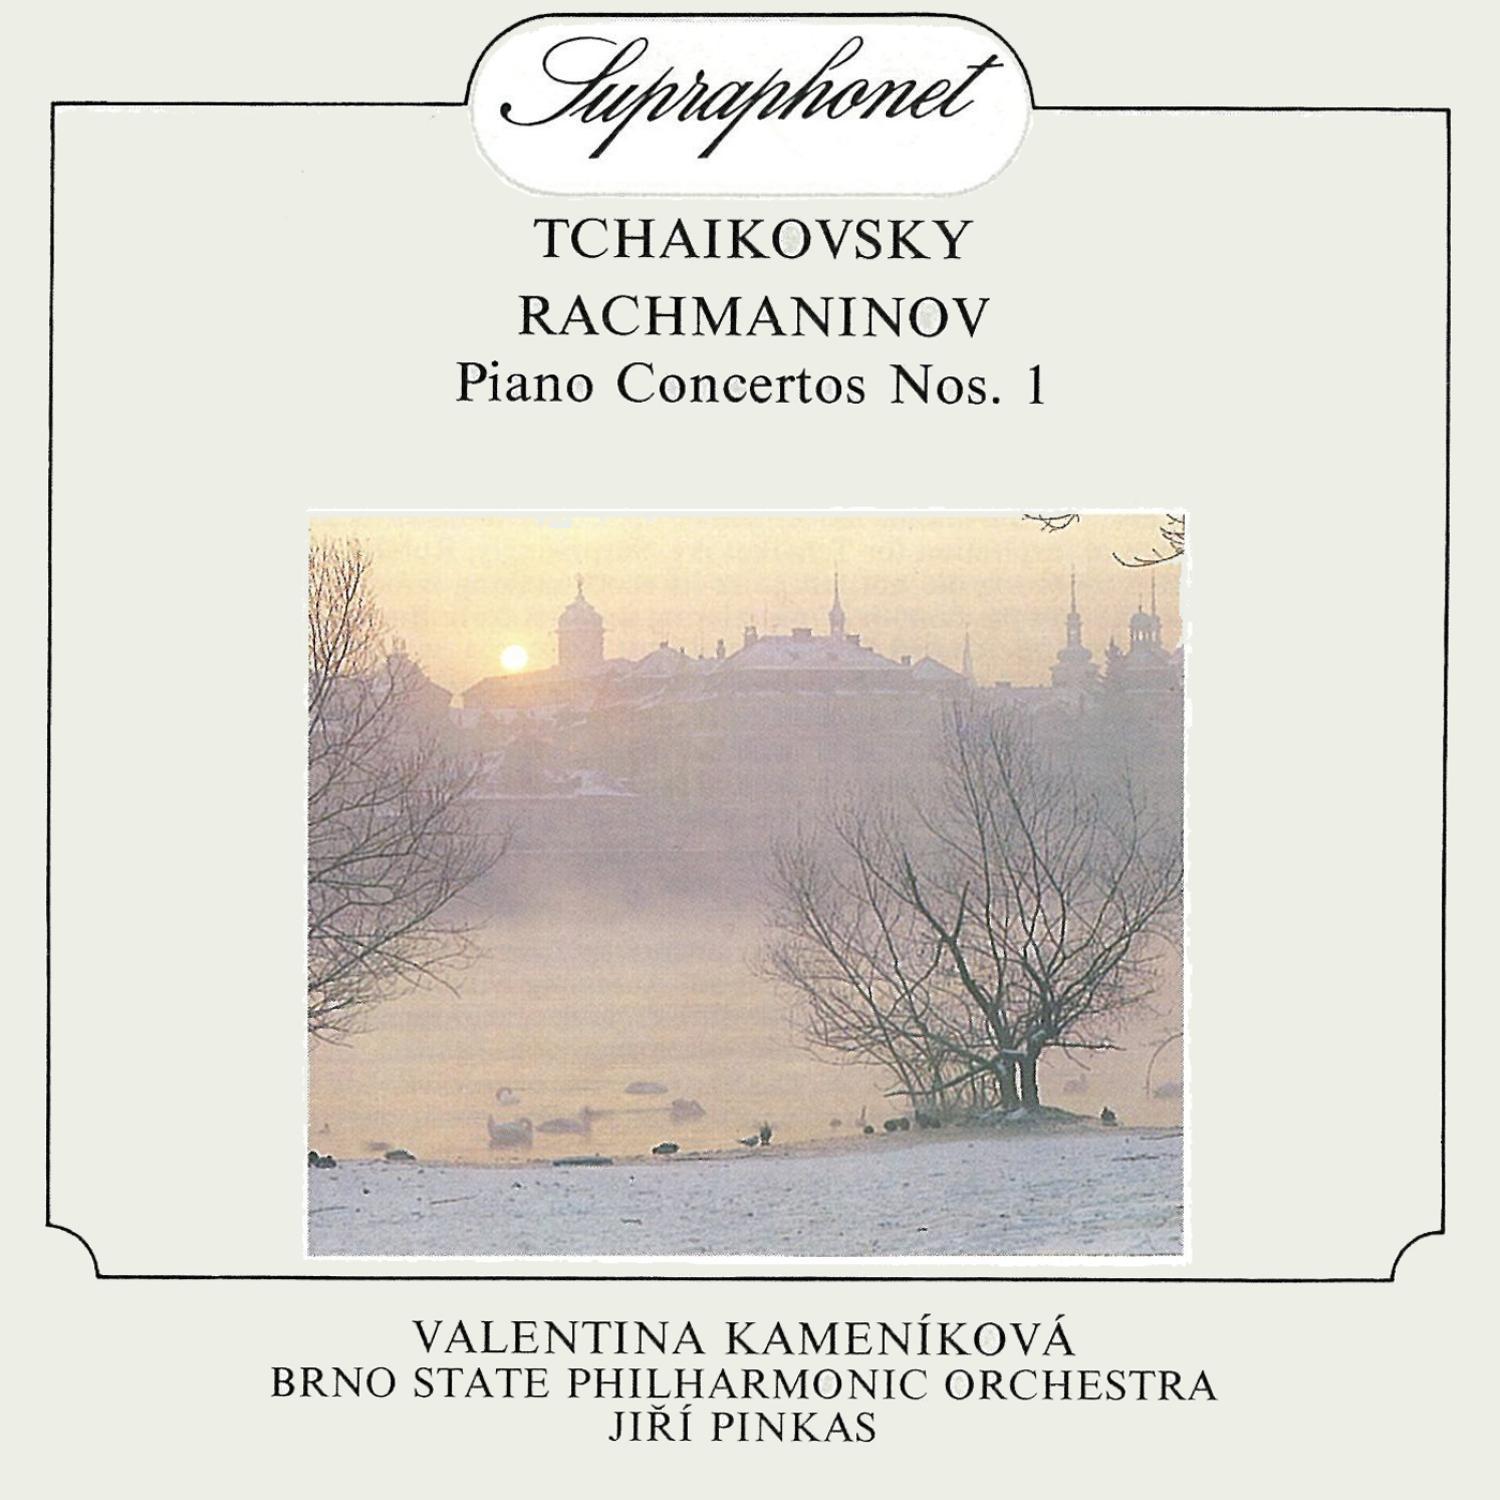 Concerto for Piano and Orchestra No. 1 in B flat minor, Op. 23, II. Andantino simplice